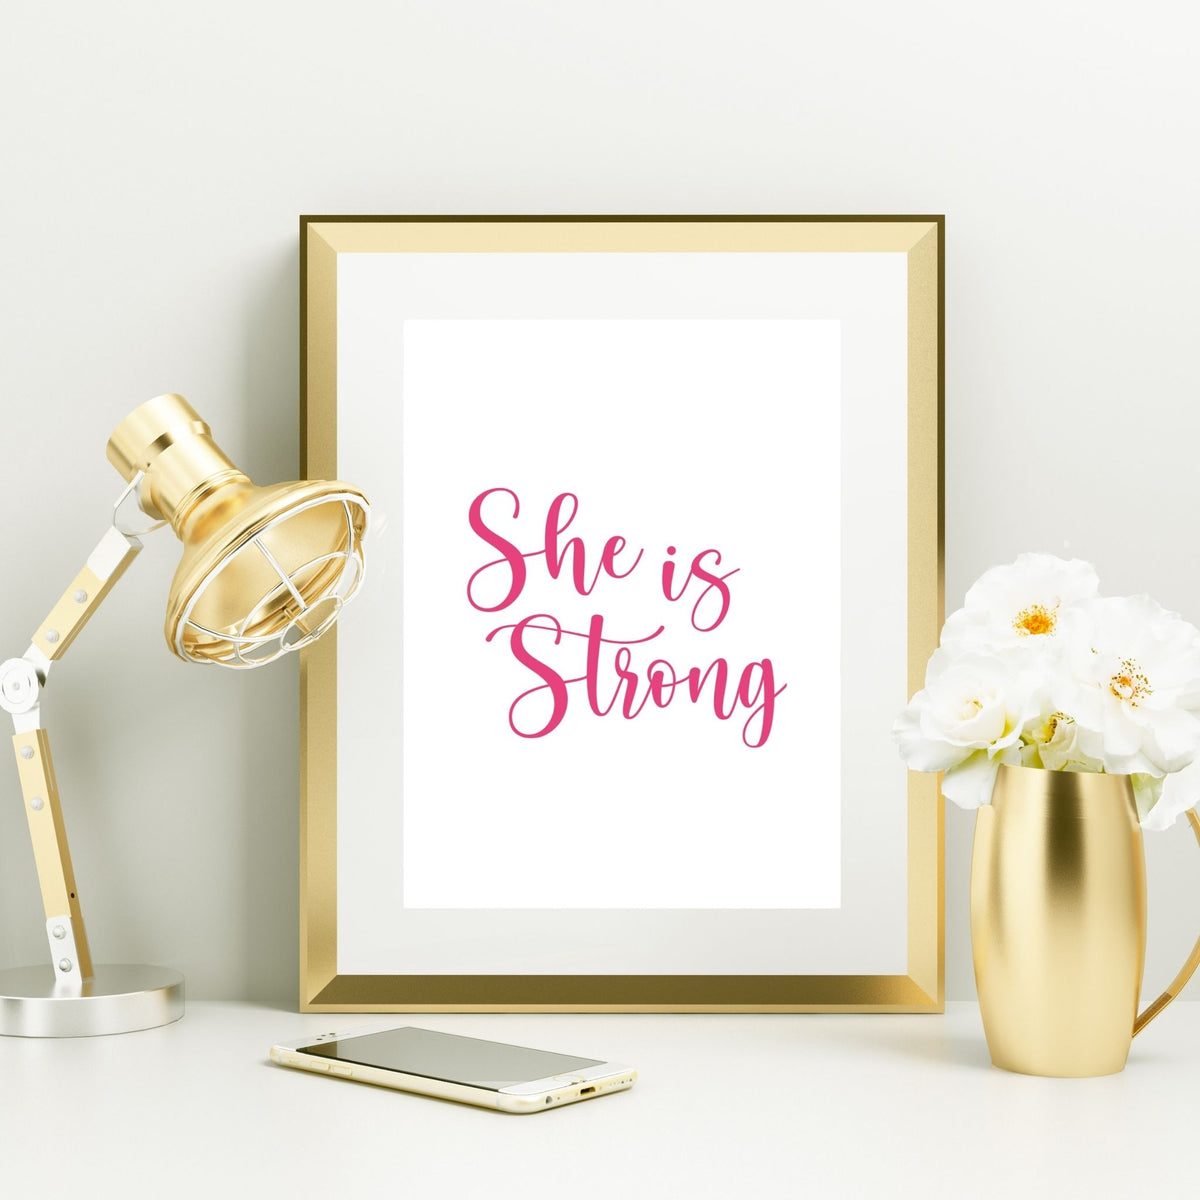 She is Strong Digital Print